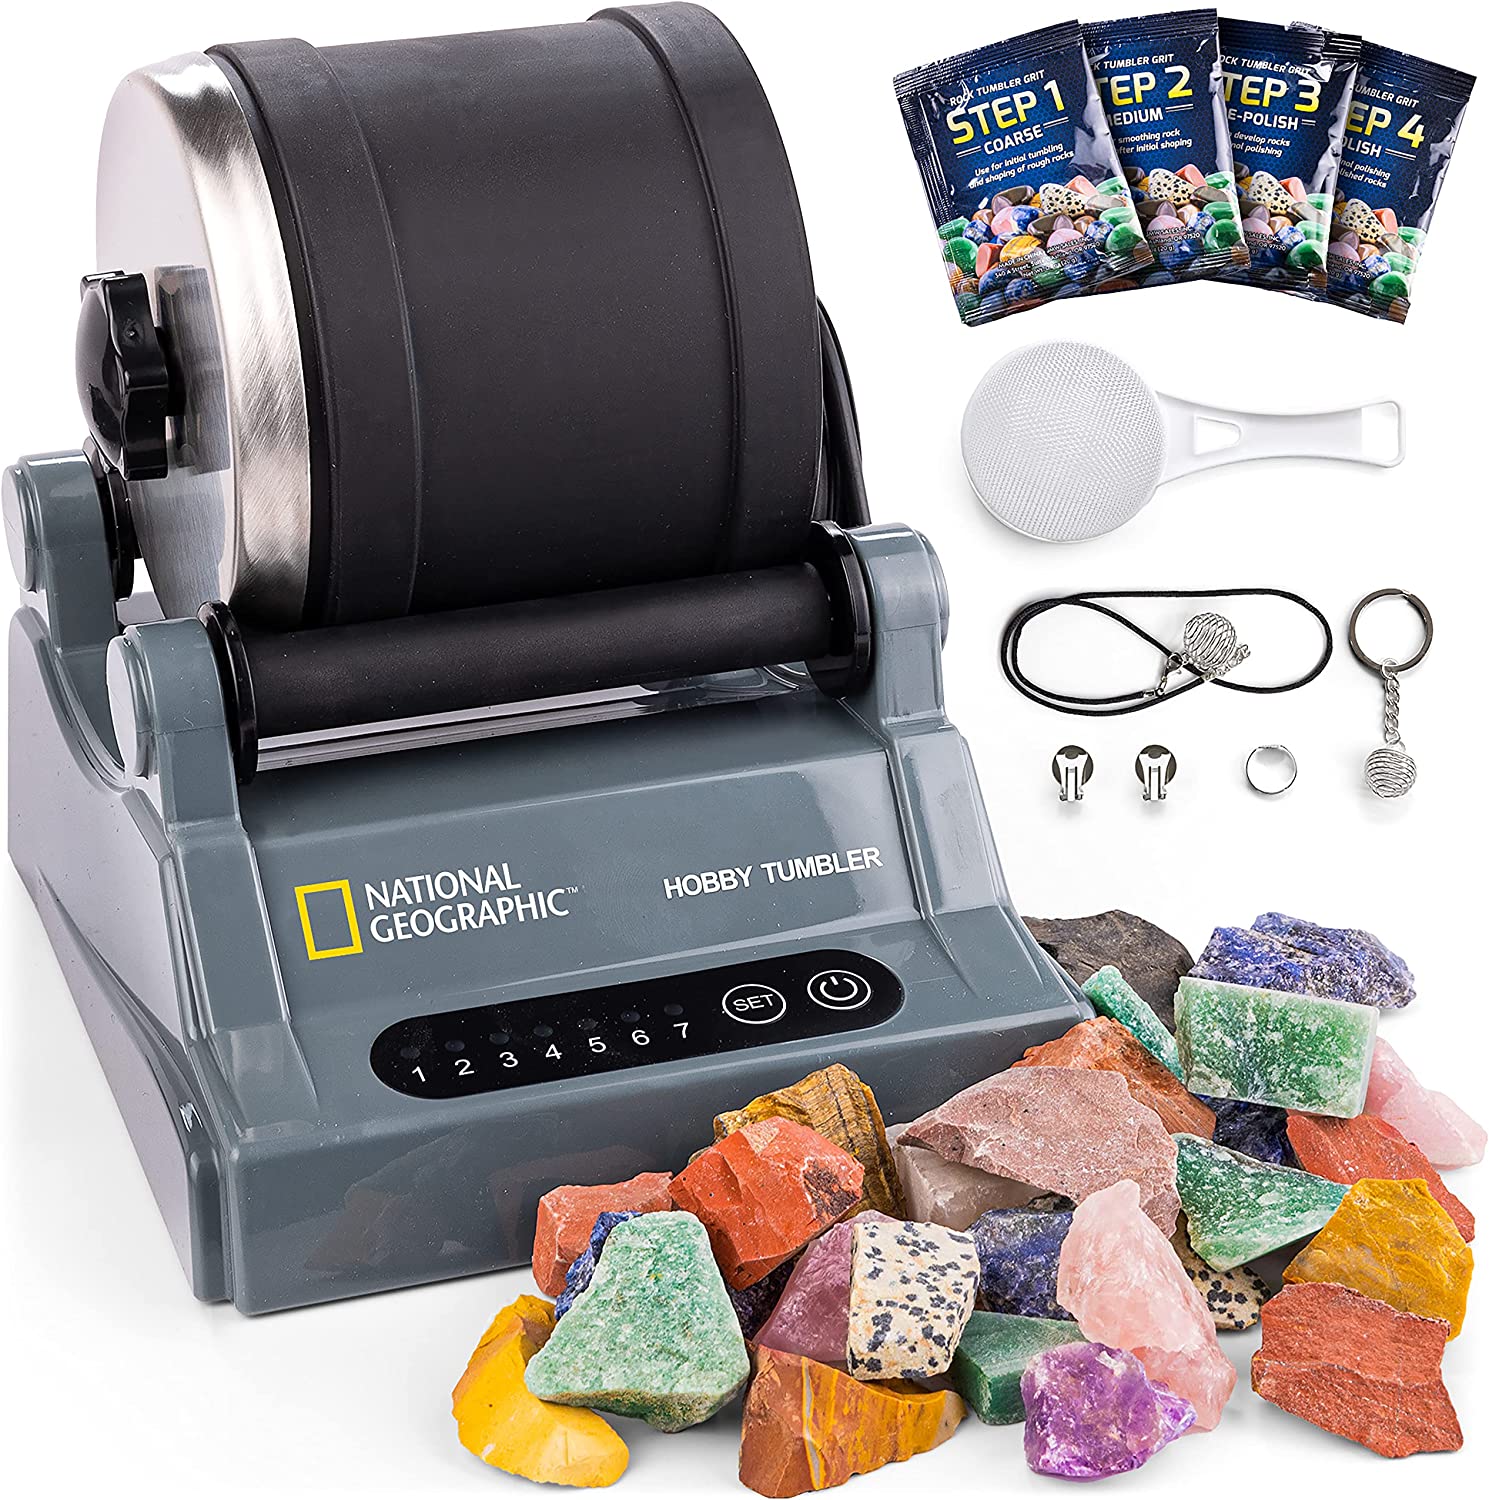 NATIONAL GEOGRAPHIC Hobby Rock Tumbler Kit – Includes Rough